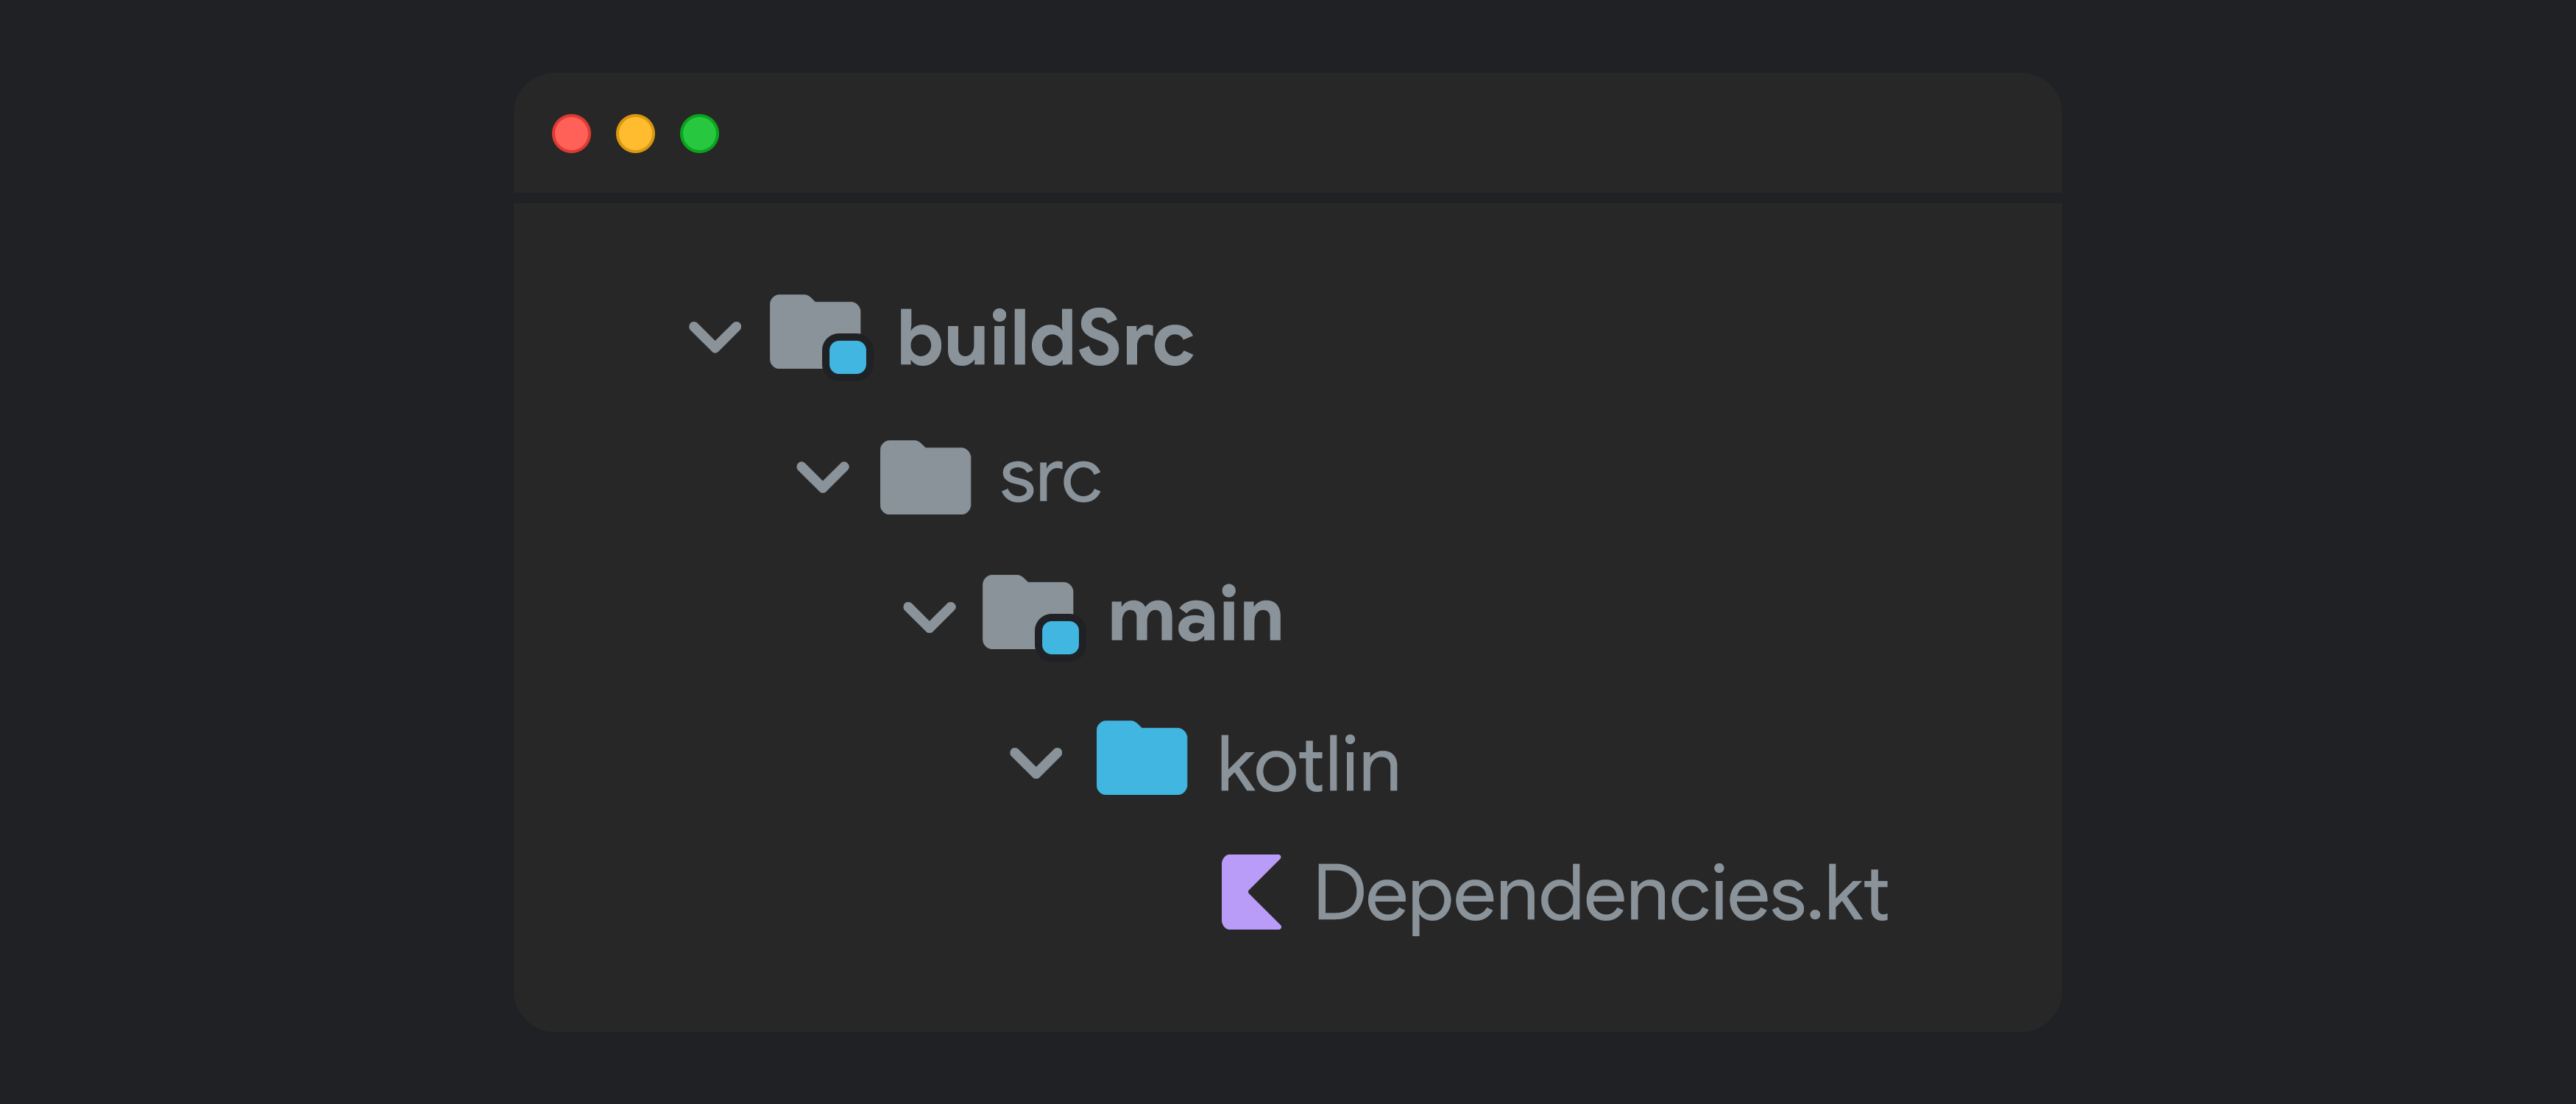 How to Avoid Dependency Conflicts in Android Multi-Module Apps